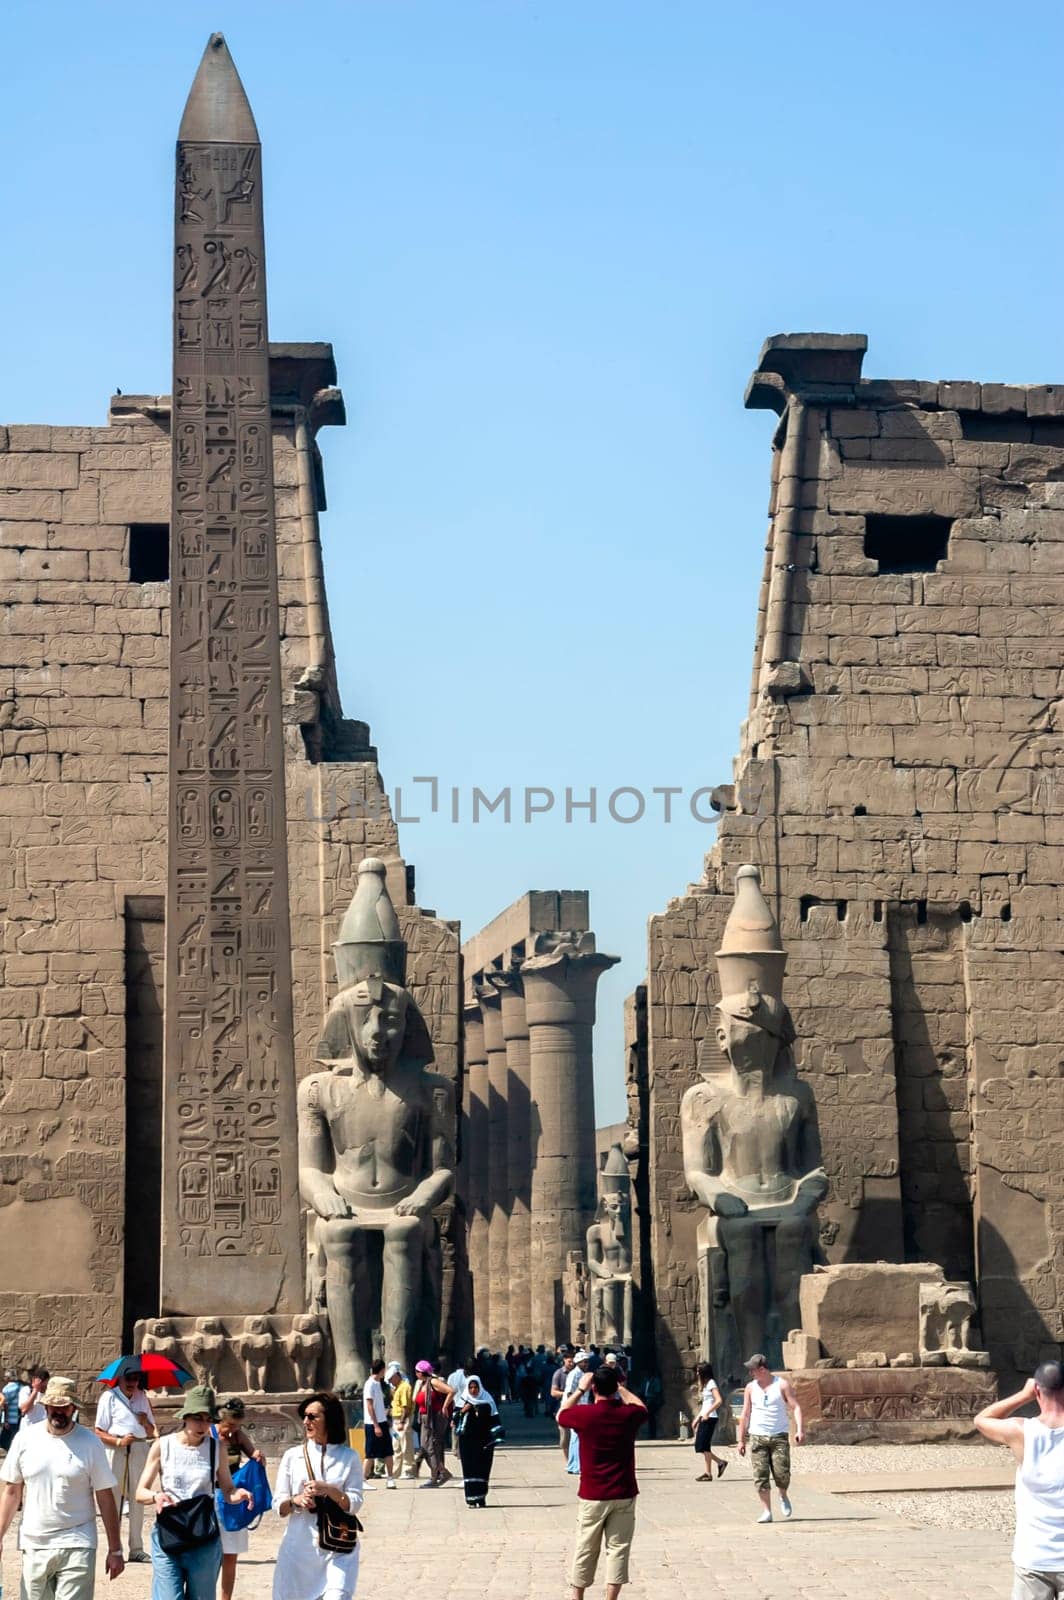 Luxor, Egypt - April 15 2008: Tourists visiting the temple of Amun in Karnak, Luxor, Egypt